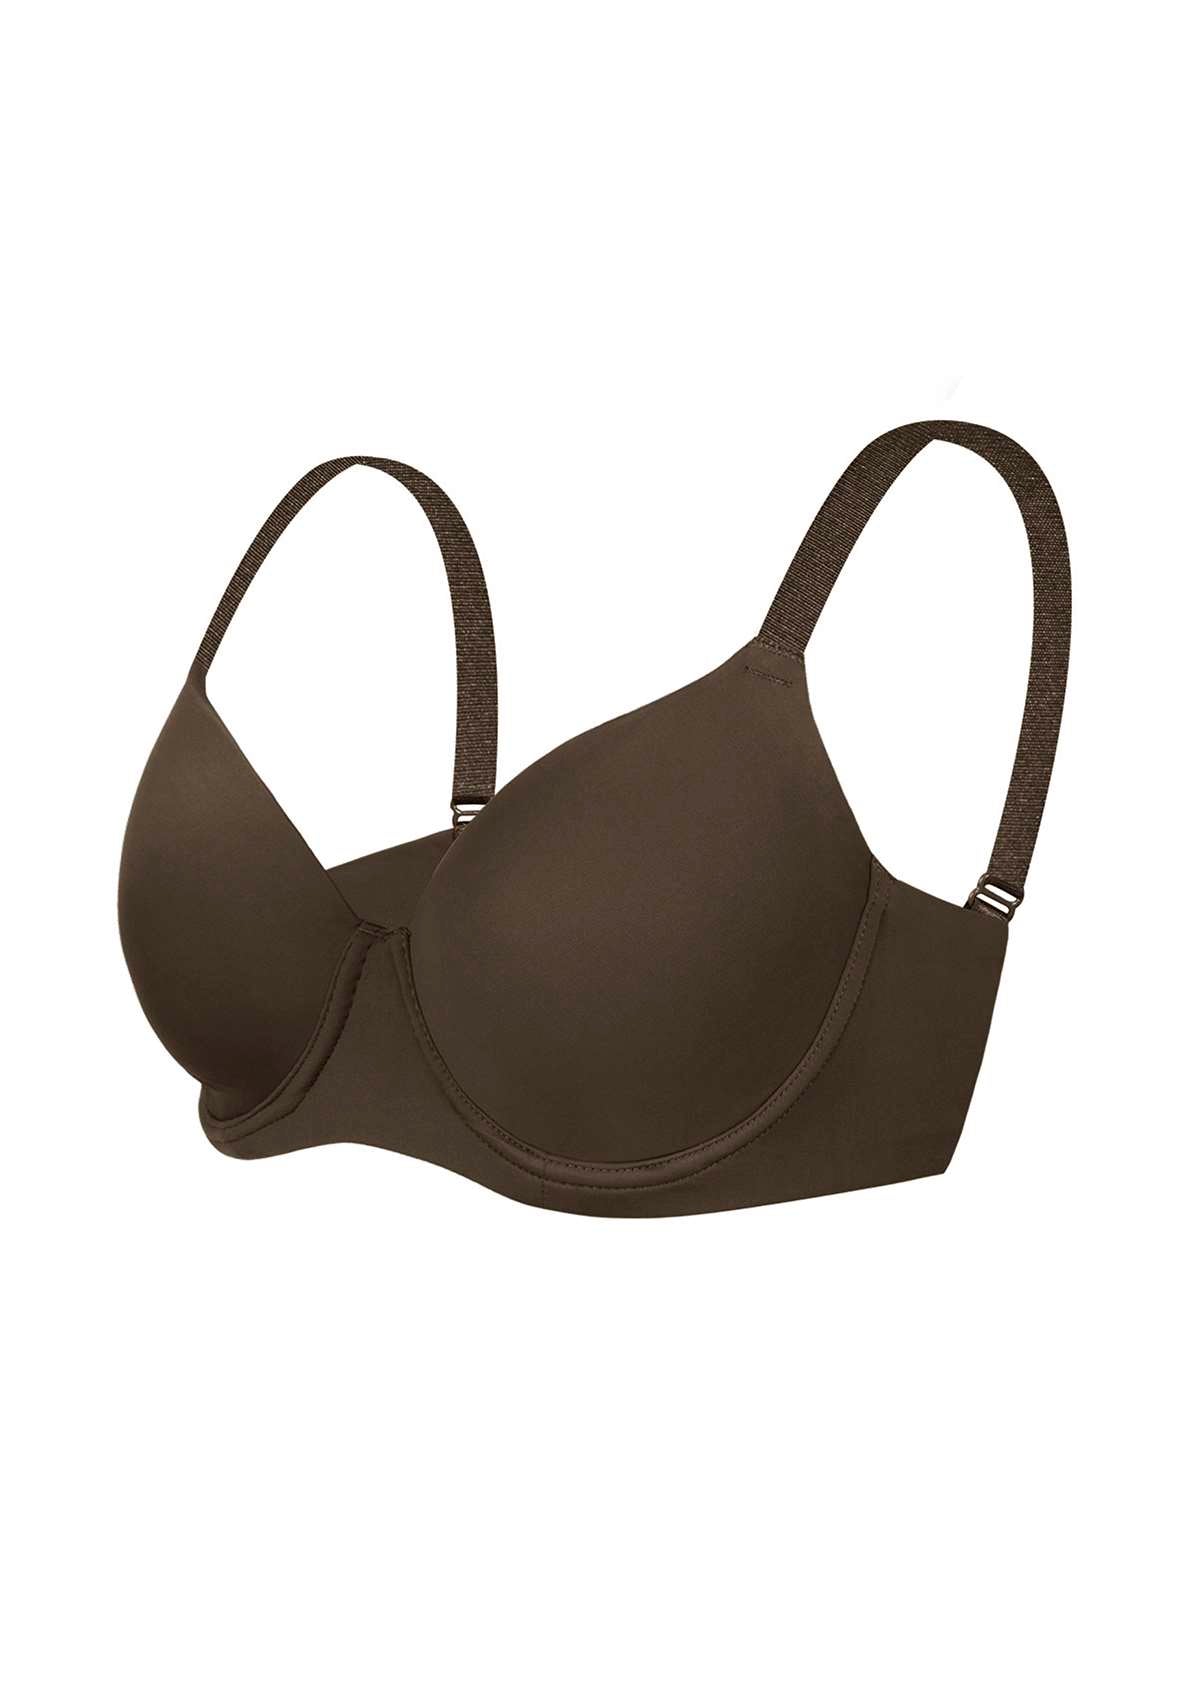 HSIA Gemma Smooth Supportive Padded T-shirt Bra - For Full Figures - Baby Pink / 34 / D